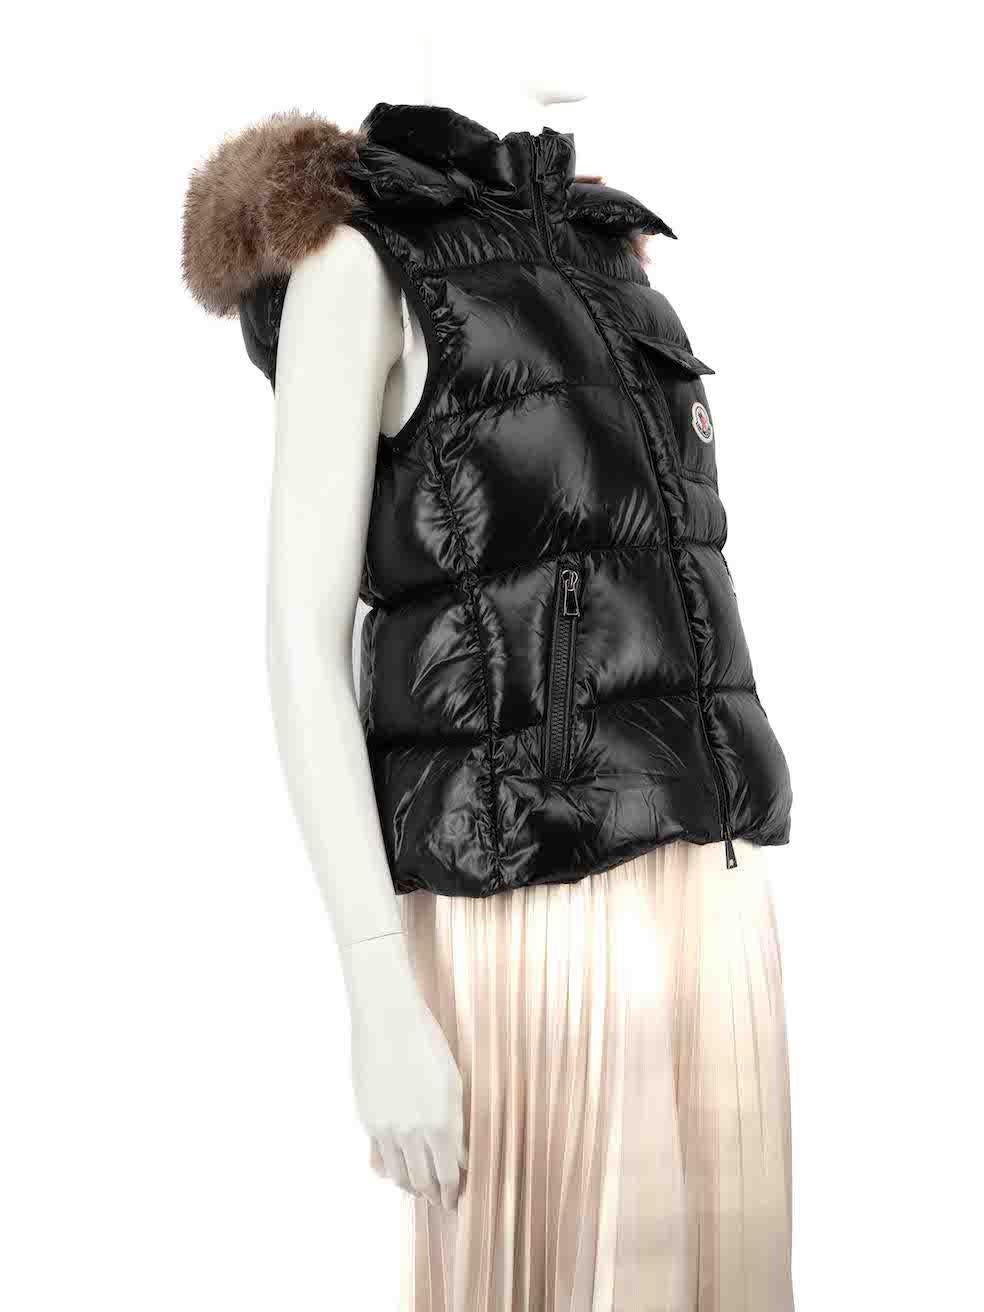 CONDITION is Very good. Hardly any visible wear to vest is evident on this used Moncler designer resale item.
 
 
 
 Details
 
 
 Balabio model
 
 Black
 
 Synthetic
 
 Puffer vest
 
 Padded and quilted
 
 Snap button removable hood
 
 Faux fur